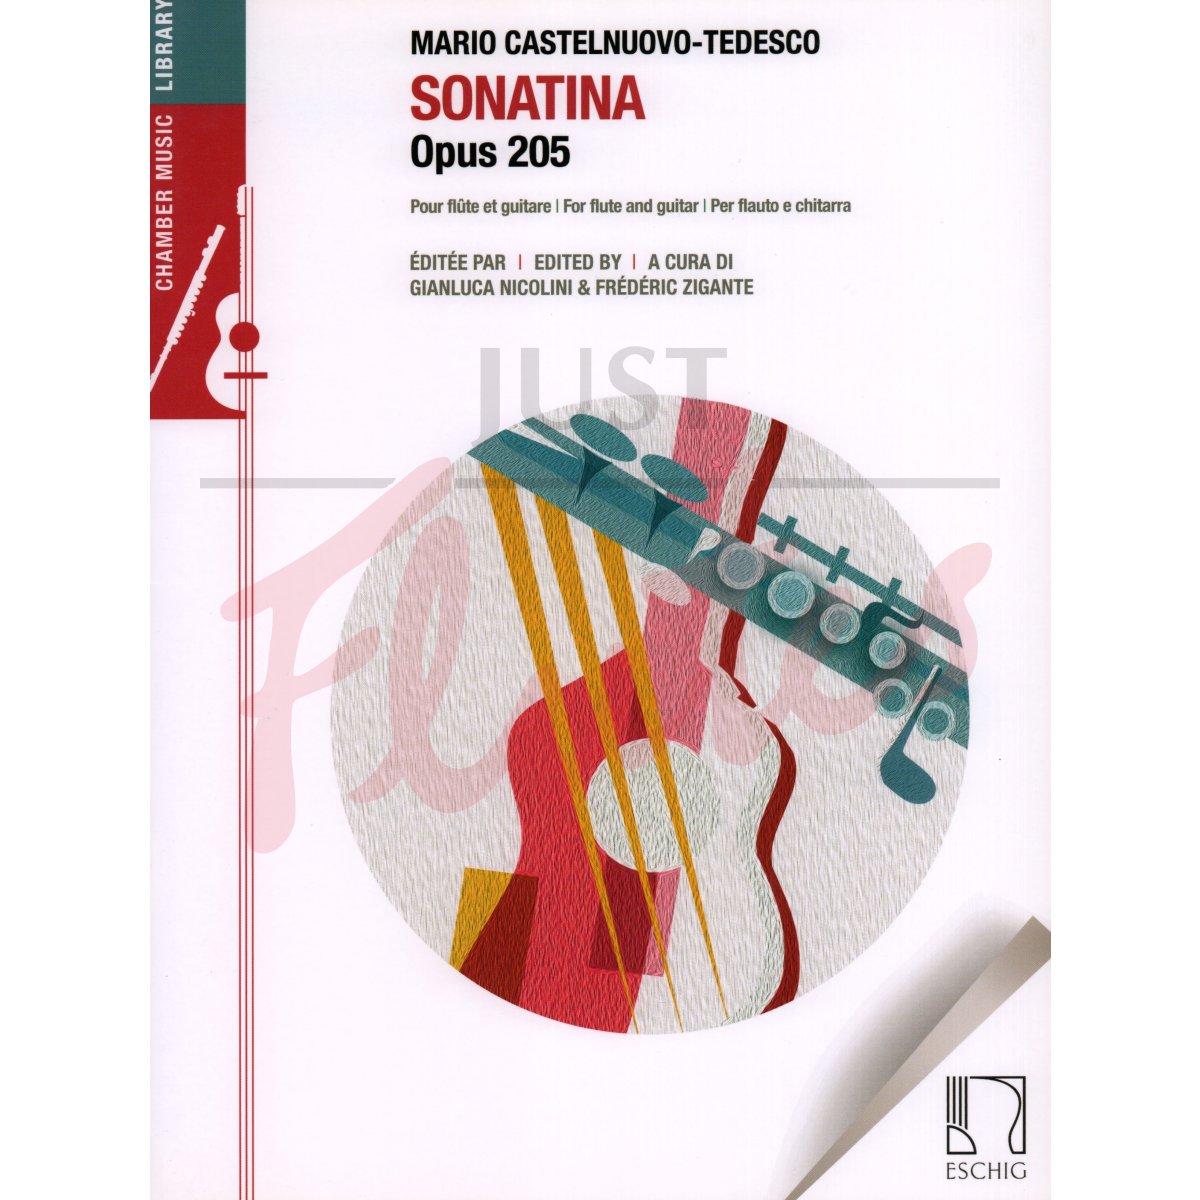 Sonatina for Flute and Guitar